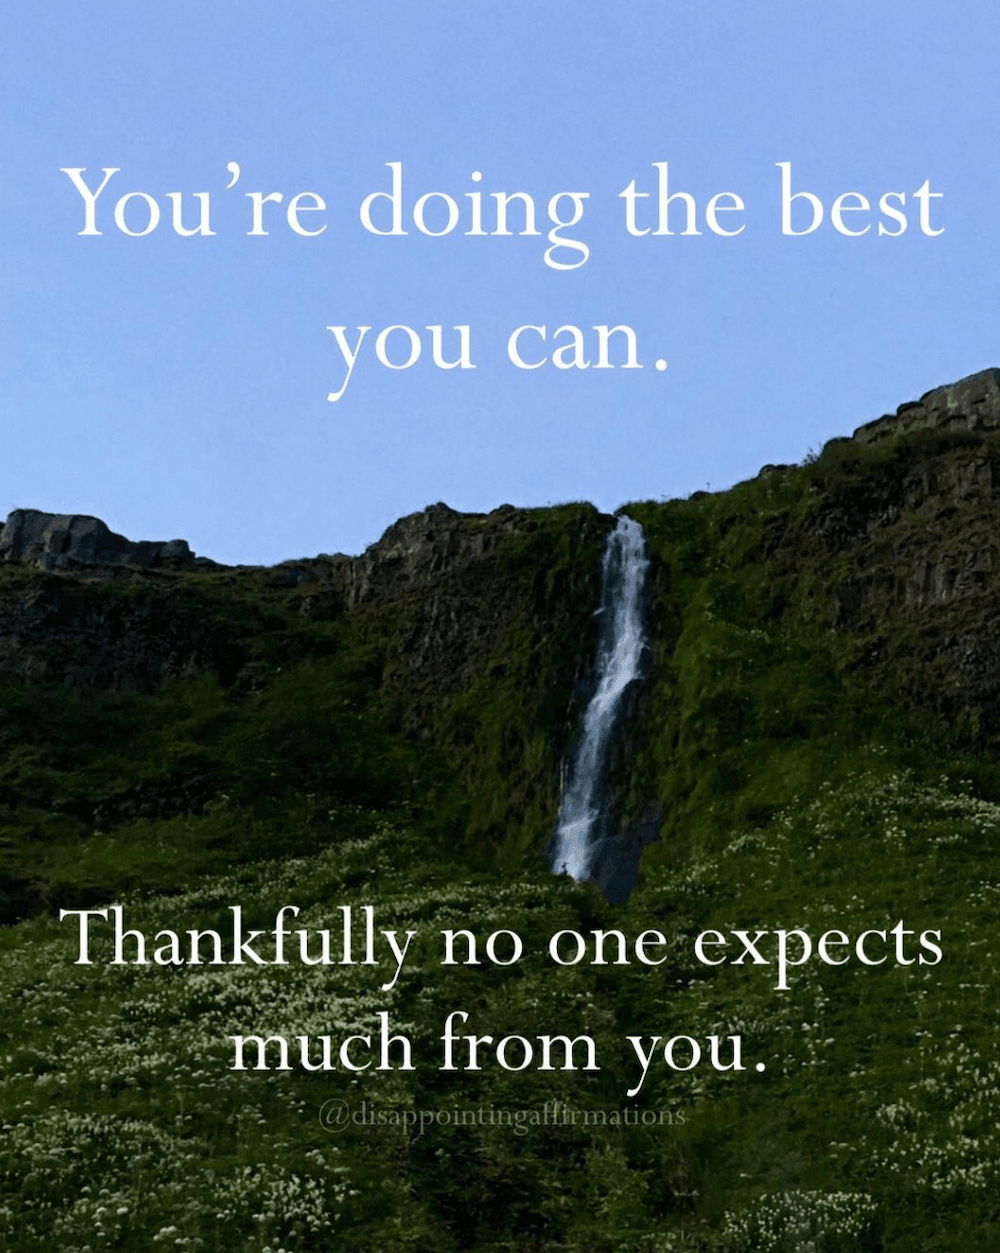 A disappointing affirmation that says "You're doing the best you can. Thankfully no one expects much from you."